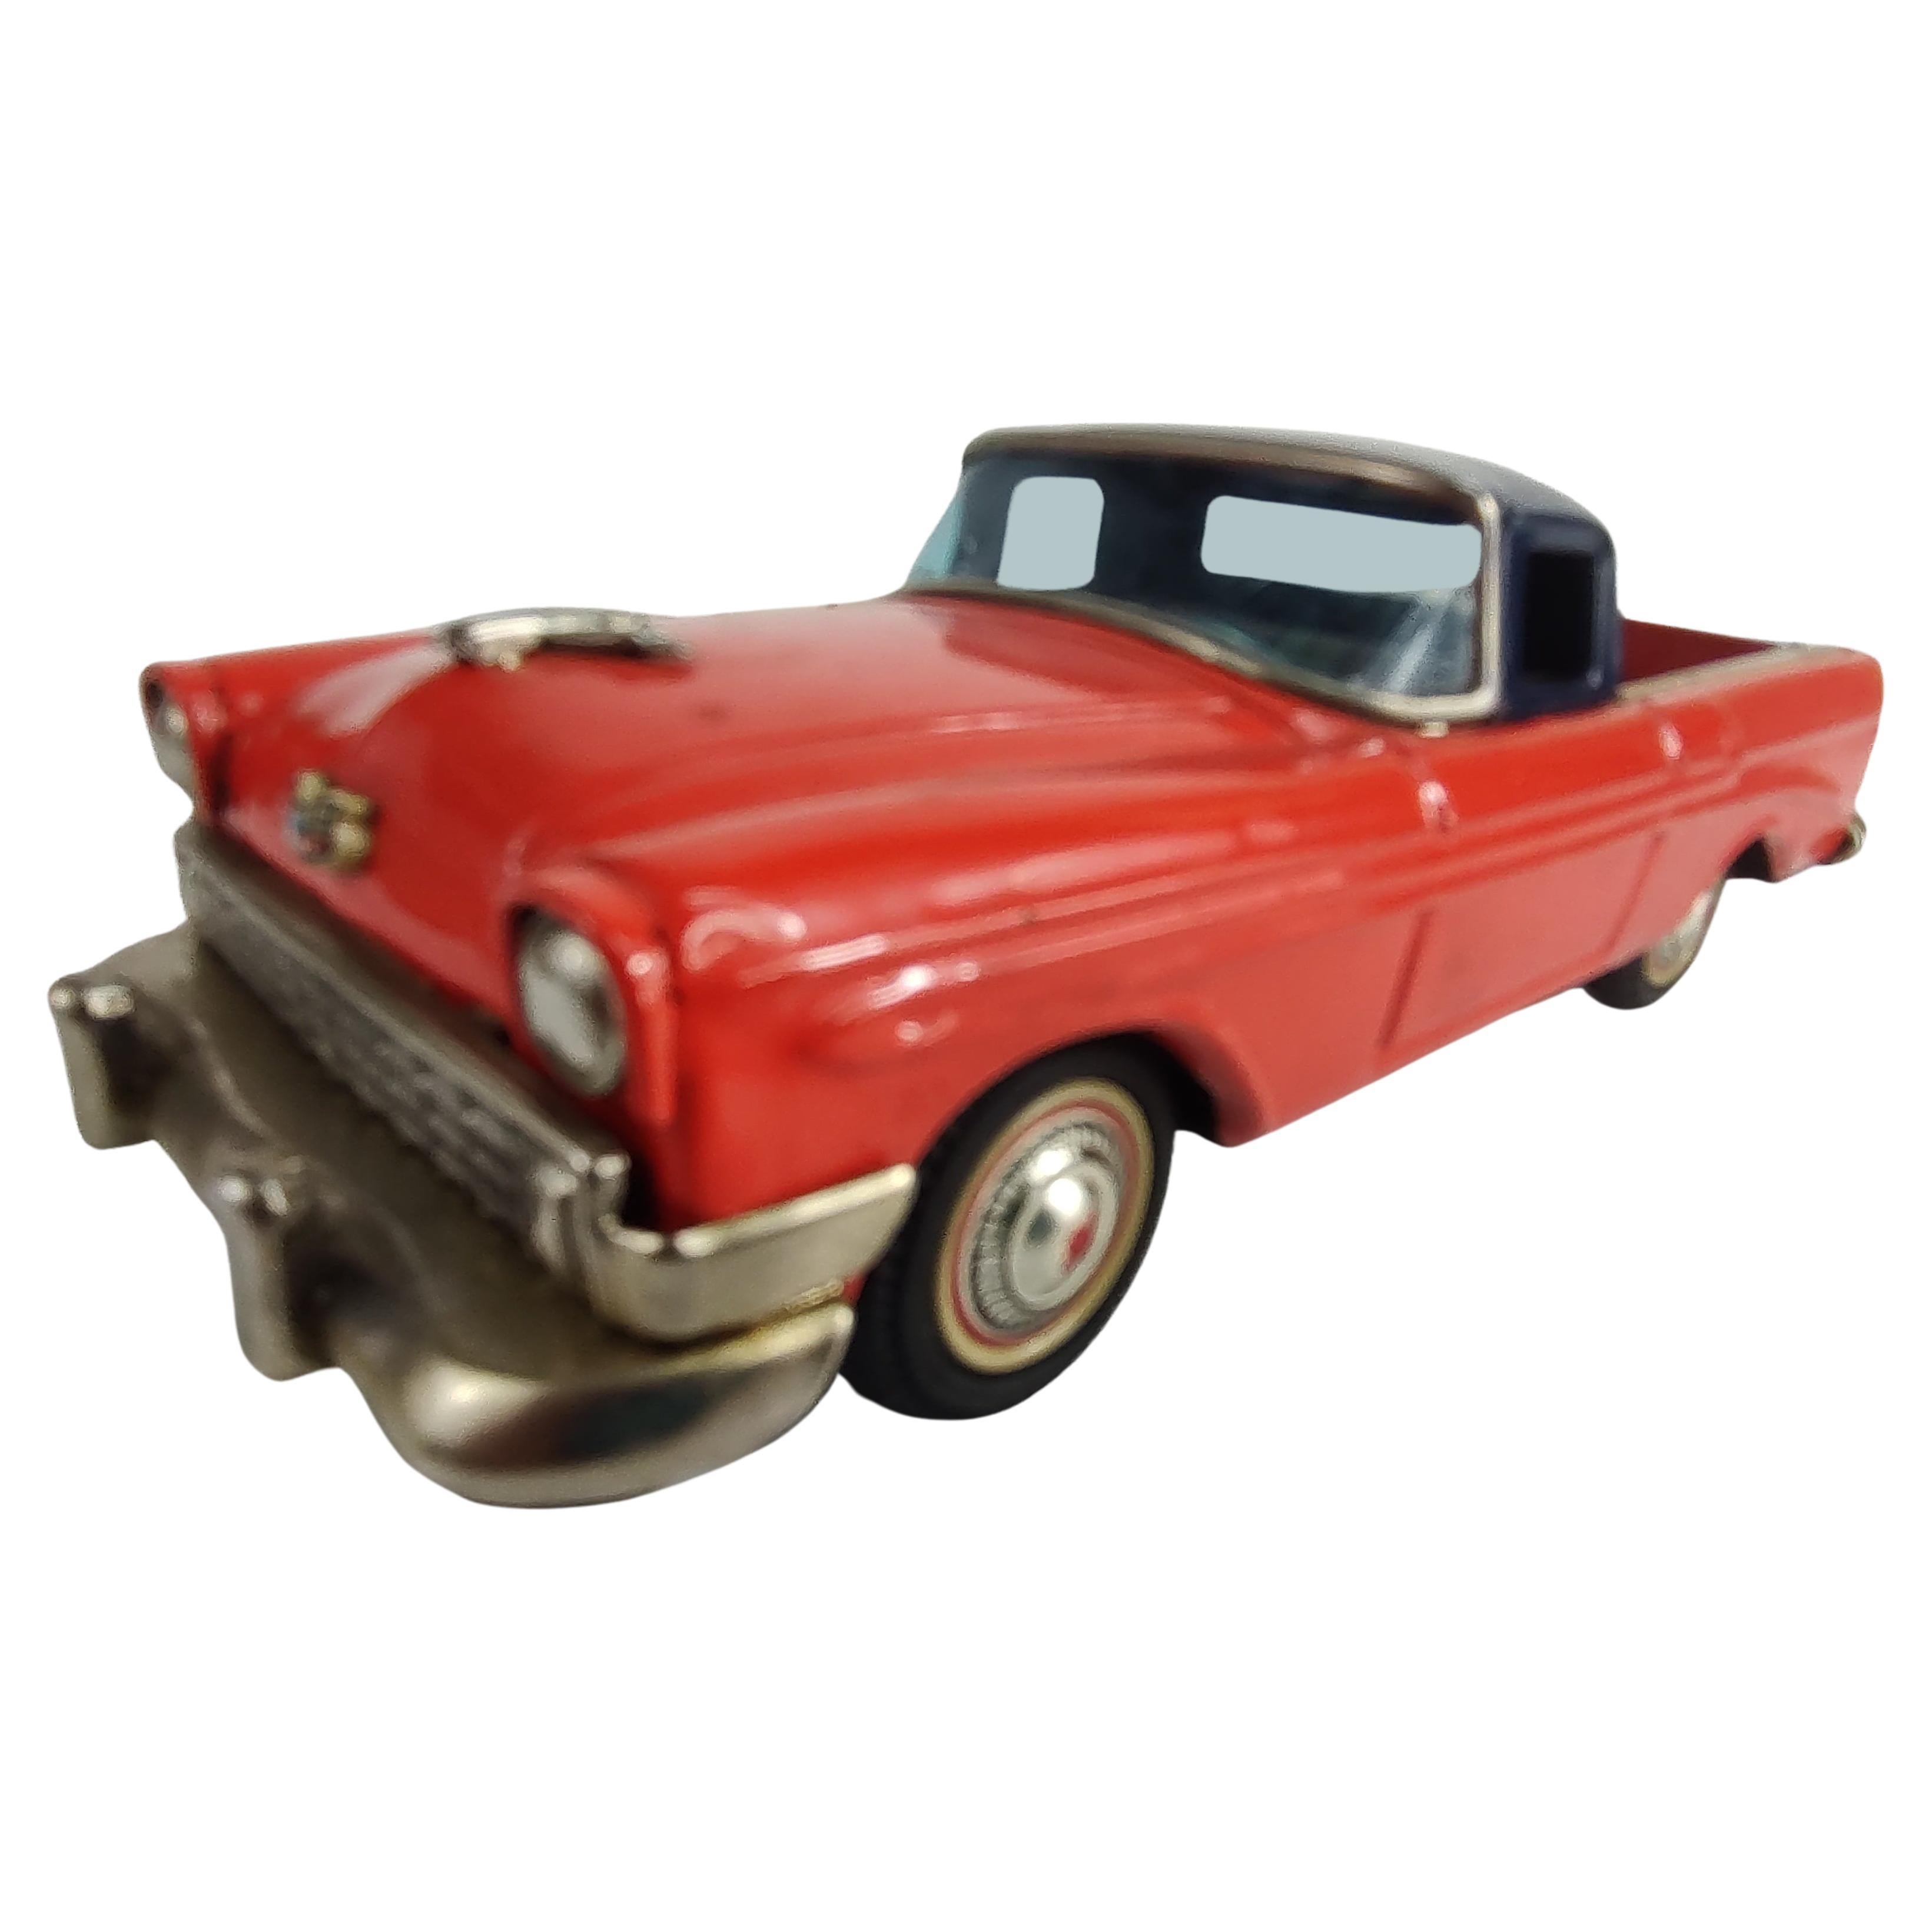 Metal Mid Century Japanese Tin Litho Friction Toy Car Chevrolet El Camino C1956 For Sale